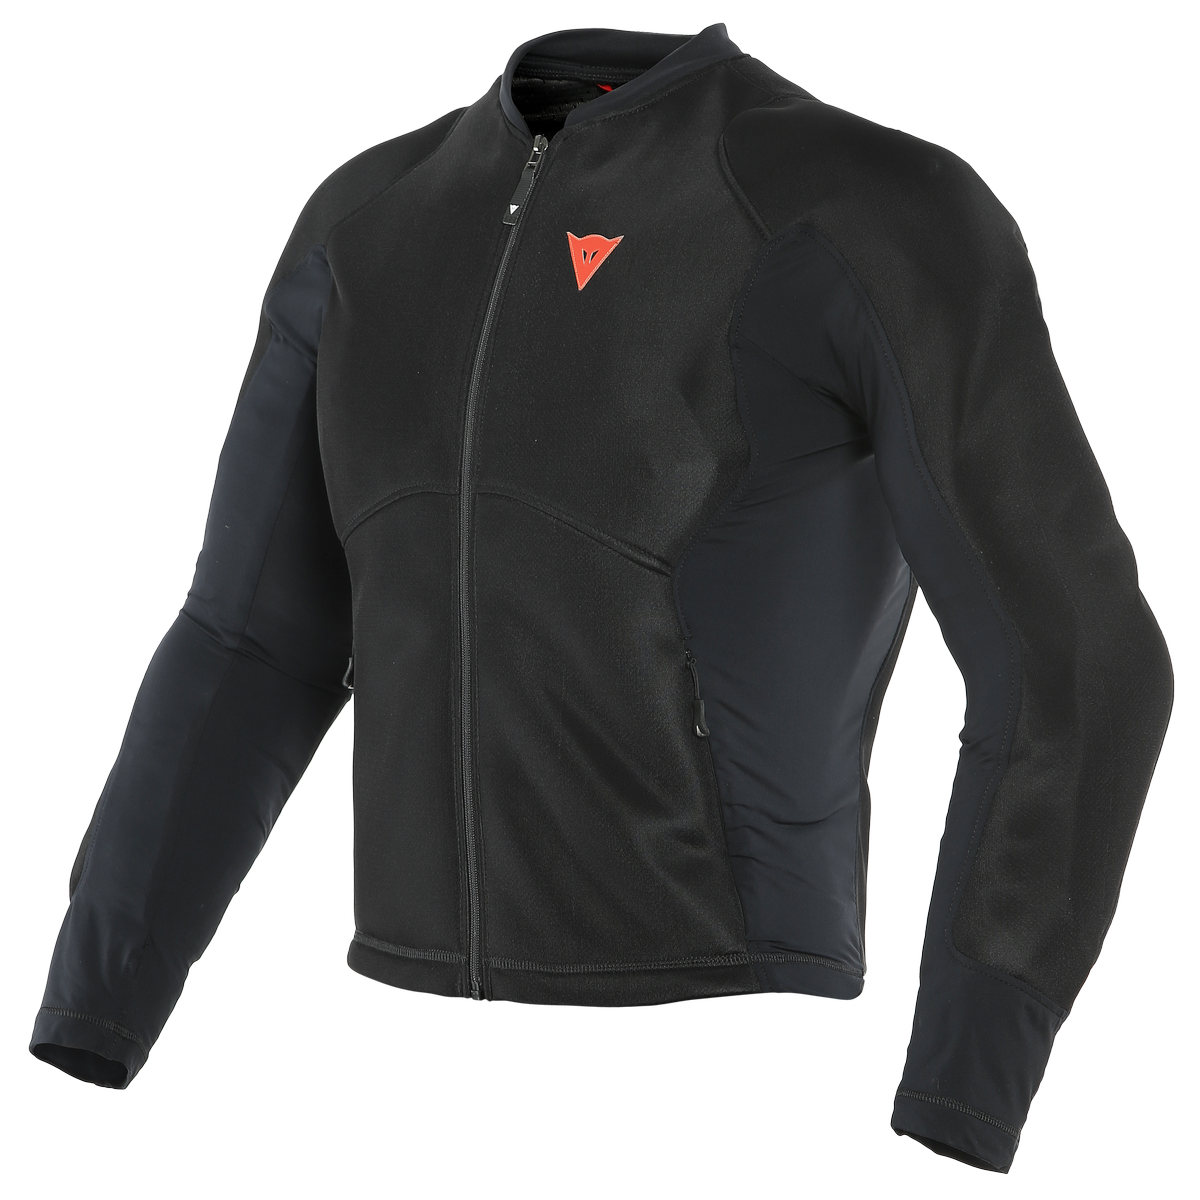 gilet de protection dainese pro-armor safety jacket 2